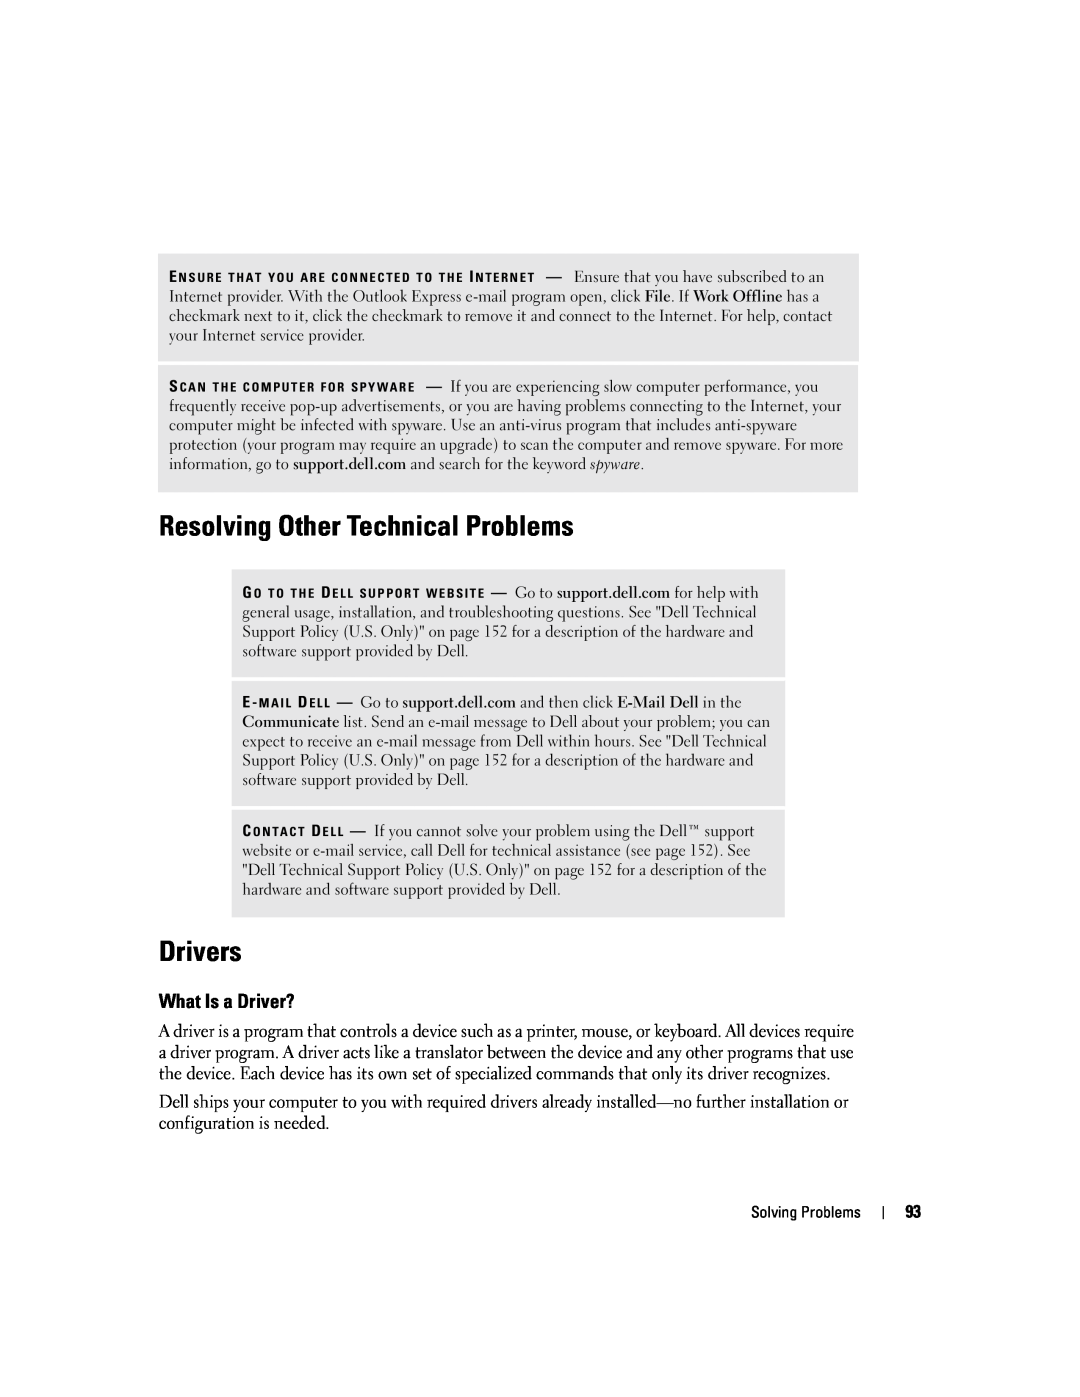 Dell PP09L owner manual Resolving Other Technical Problems, Drivers, What Is a Driver? 